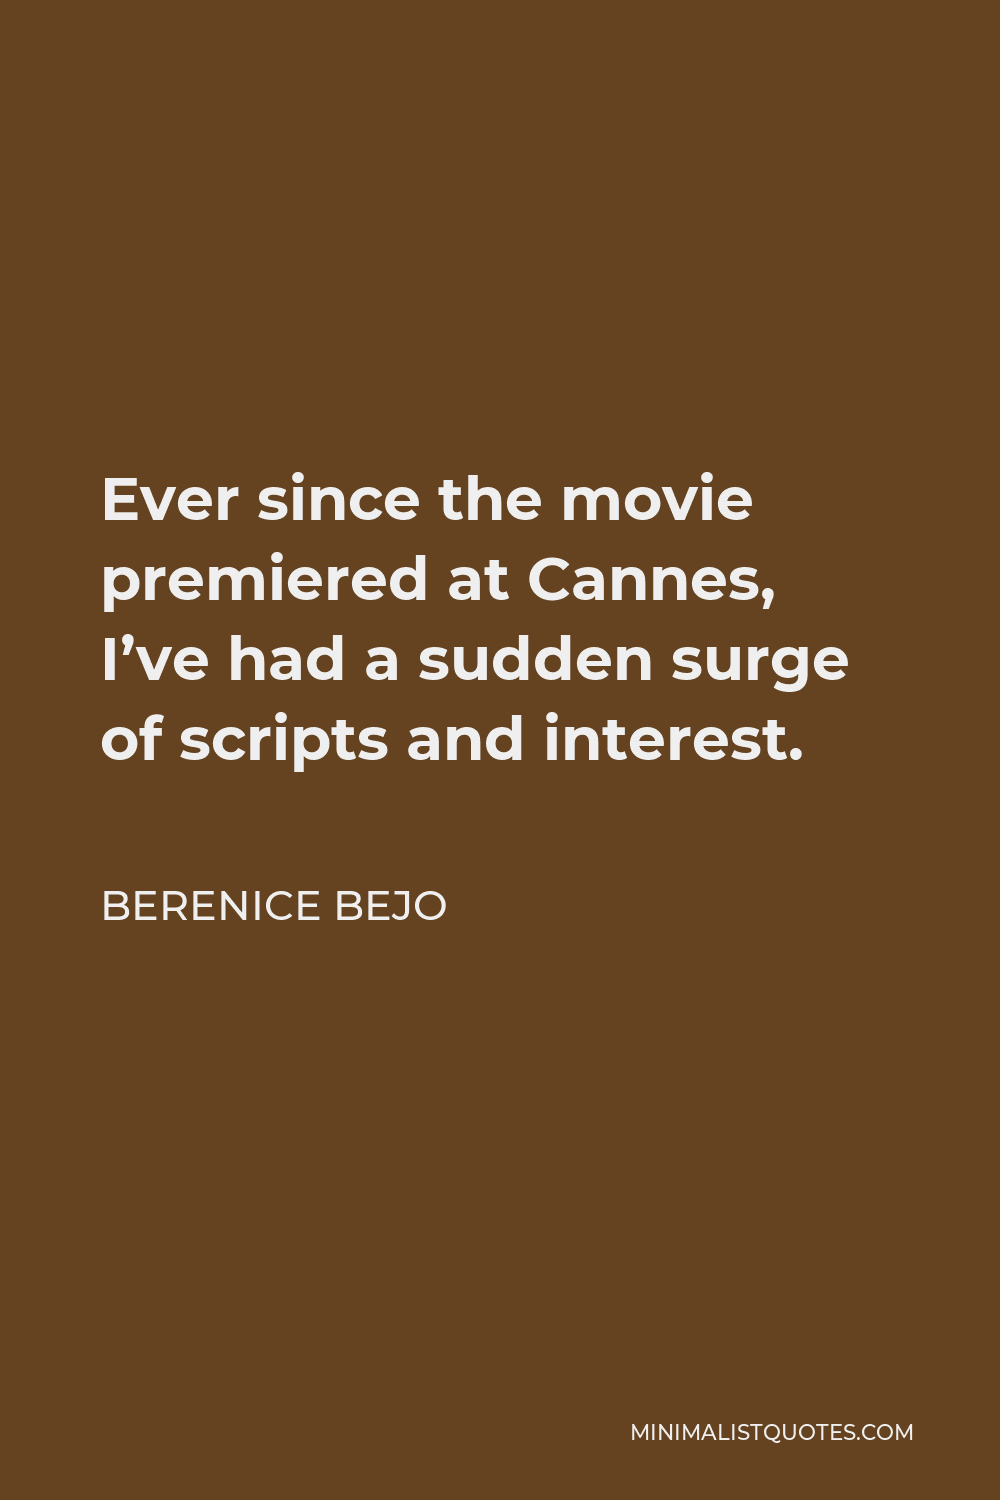 Berenice Bejo Quote - Ever since the movie premiered at Cannes, I’ve had a sudden surge of scripts and interest.